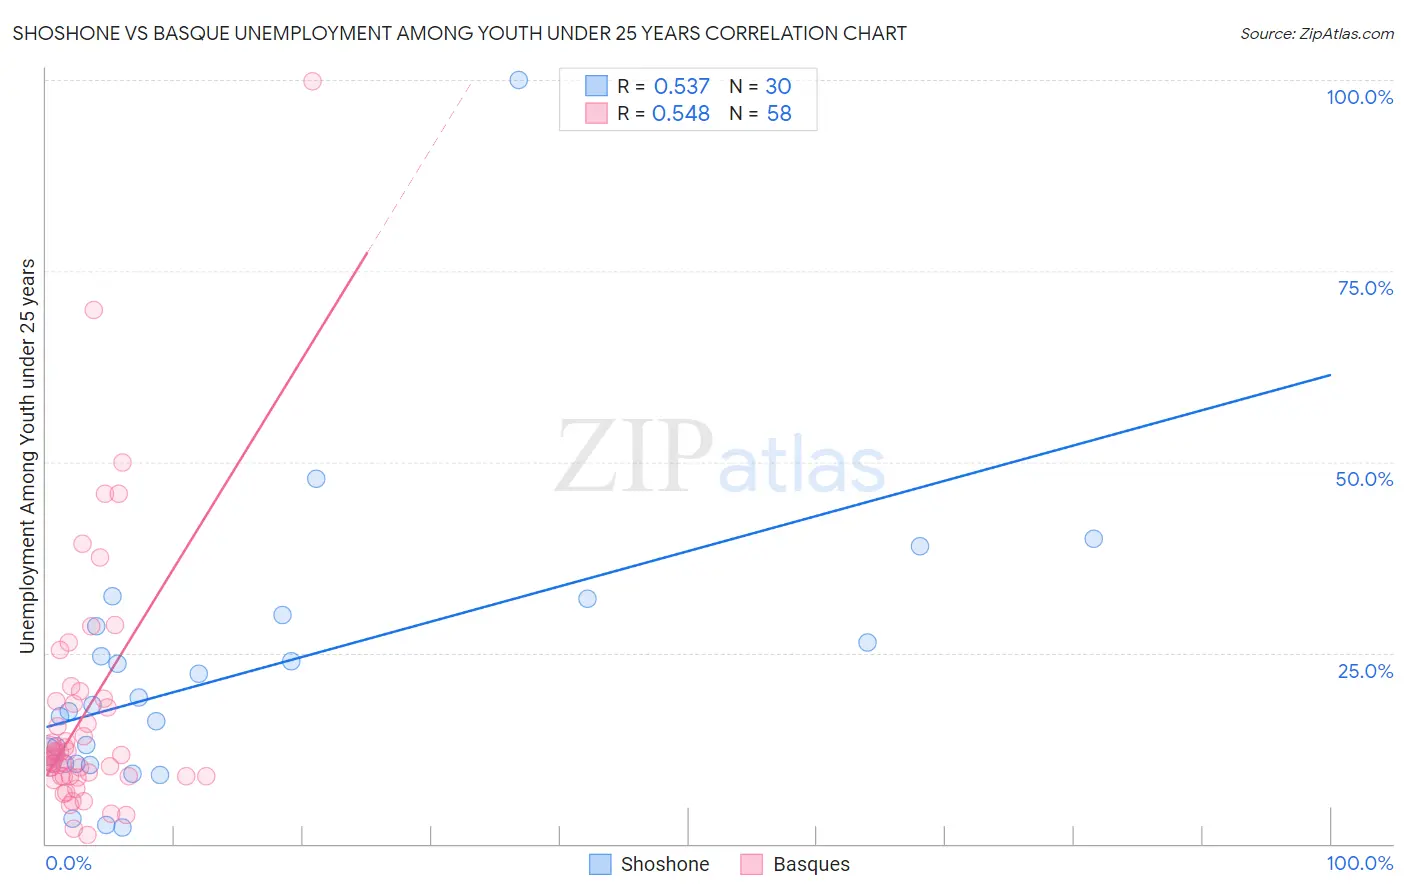 Shoshone vs Basque Unemployment Among Youth under 25 years